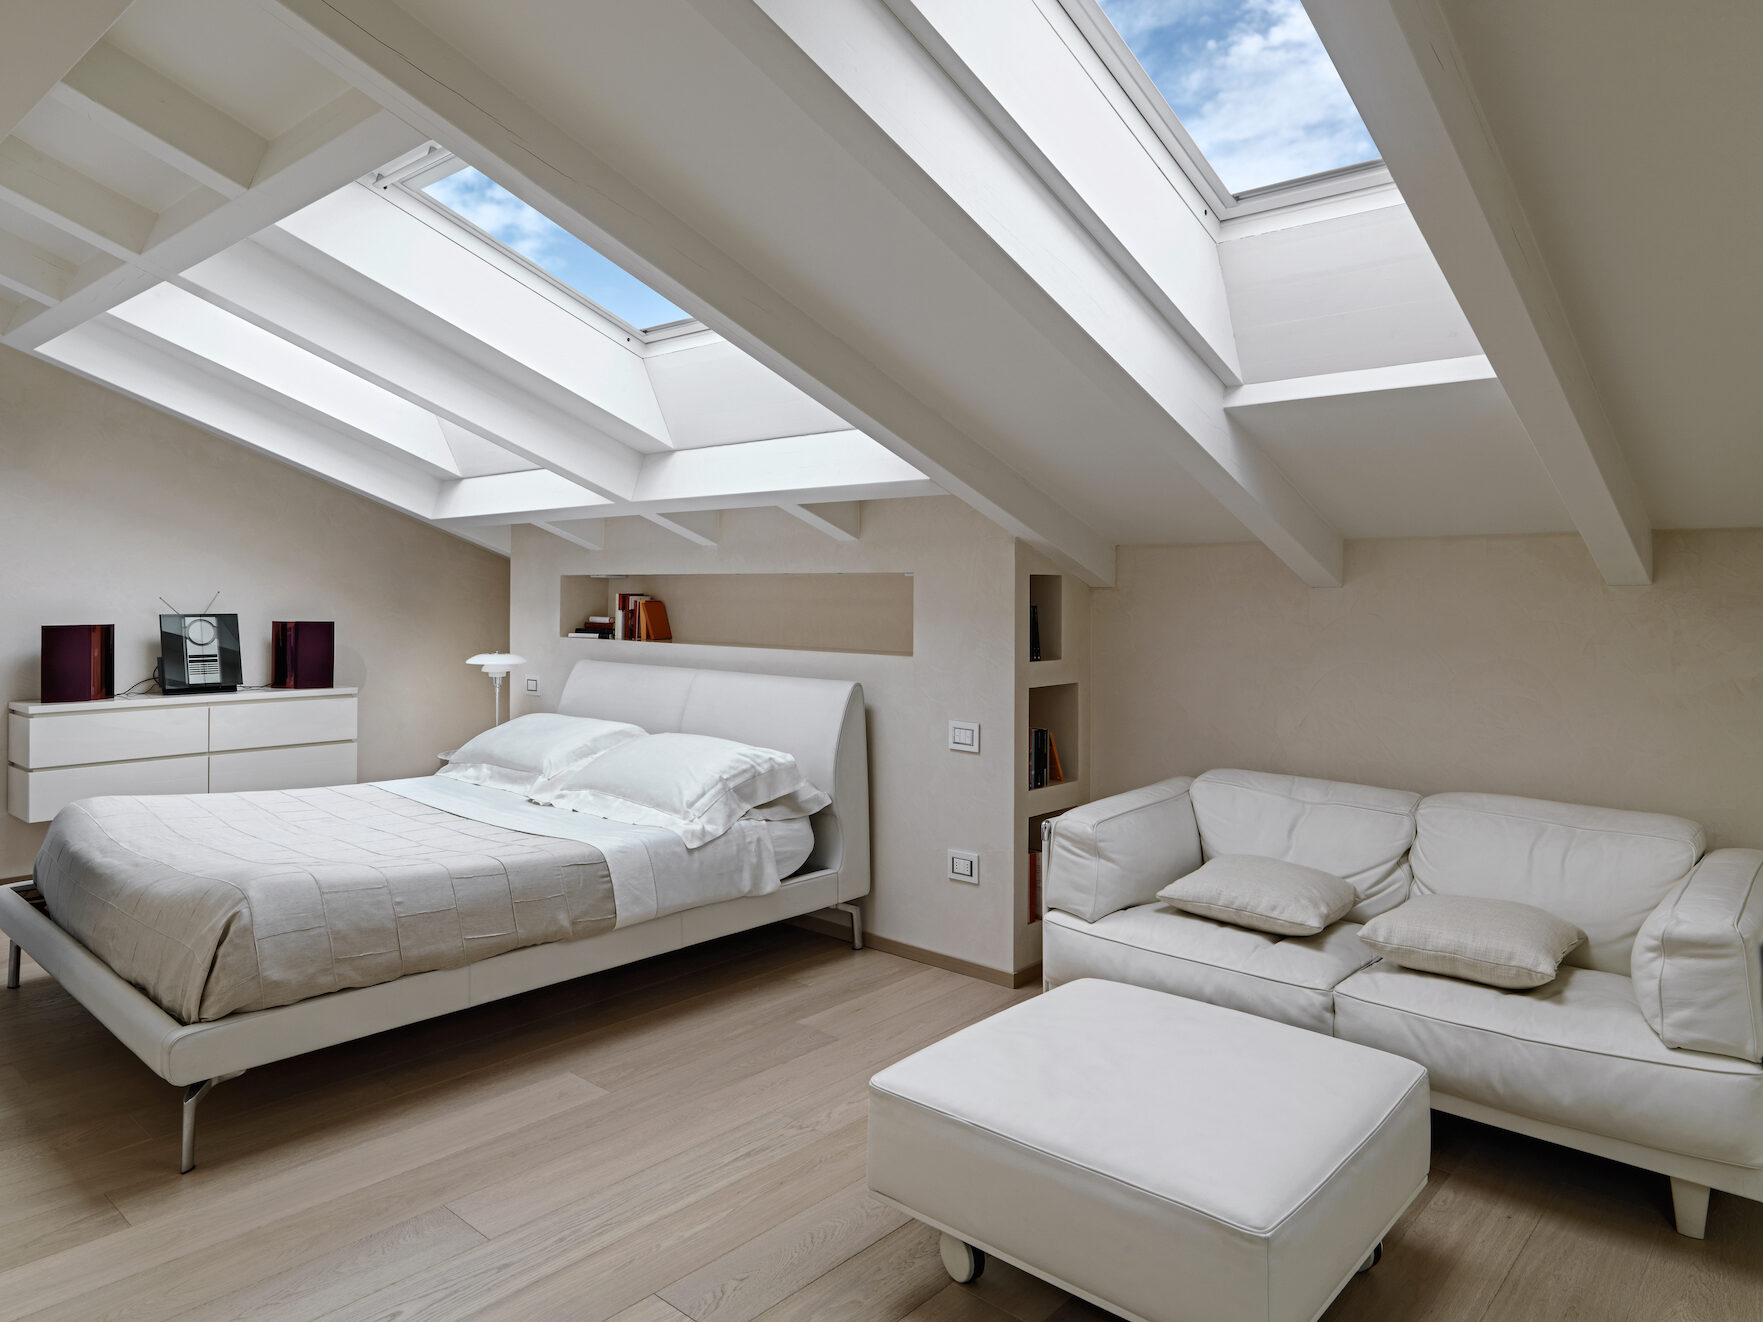 Picture of a loft bedroom with large skylights